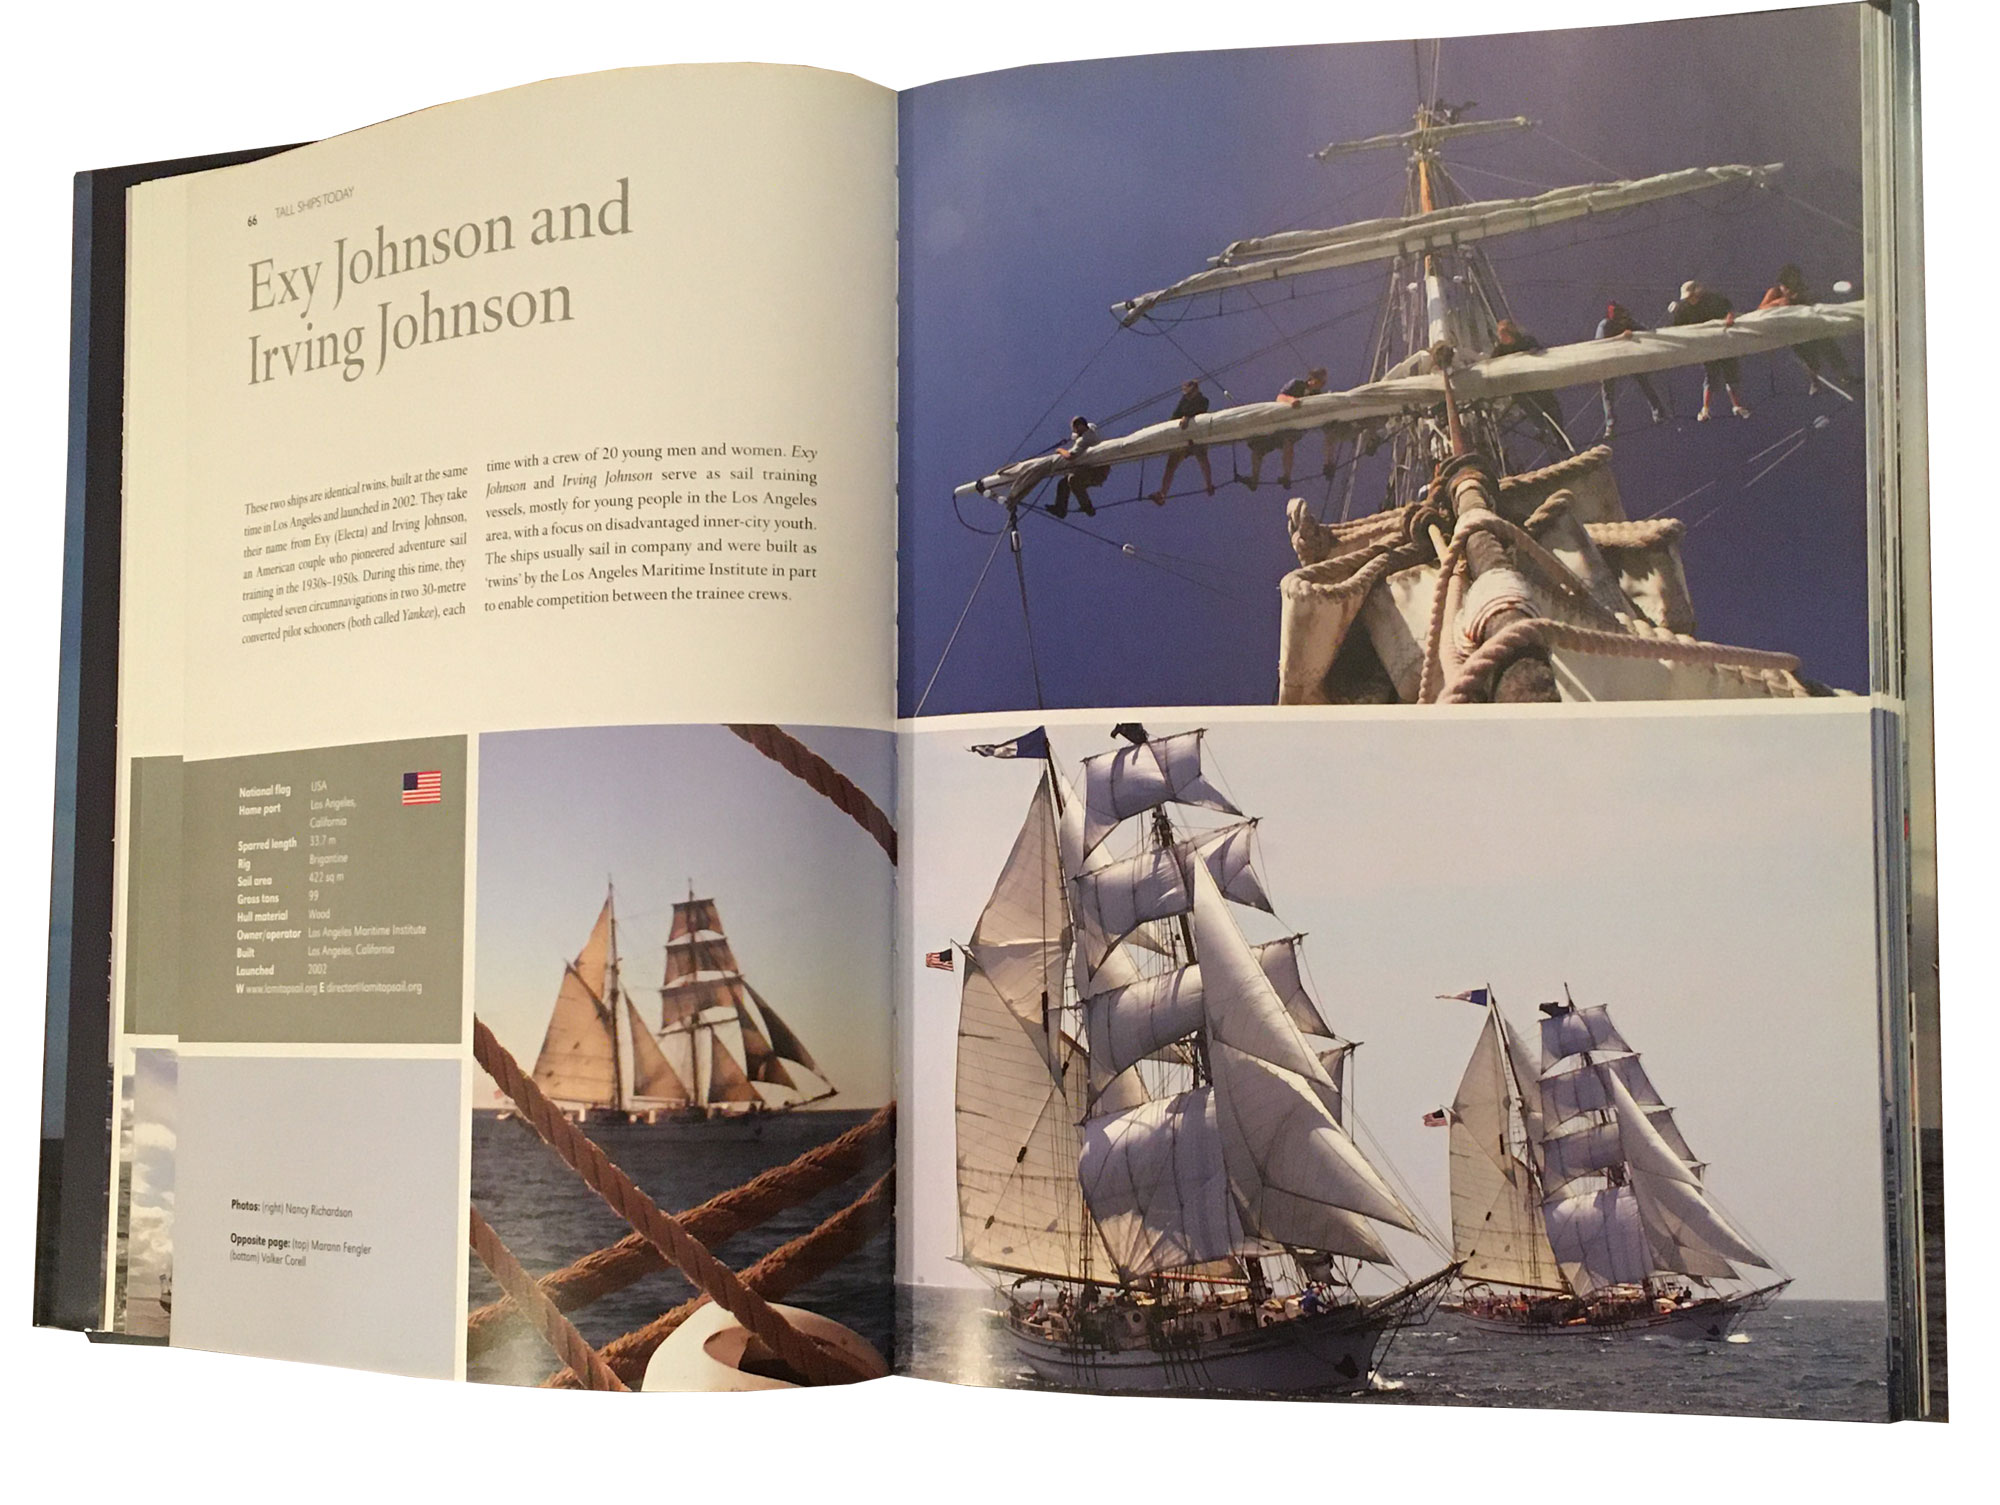 Tall Ships Today - Their remarkable story